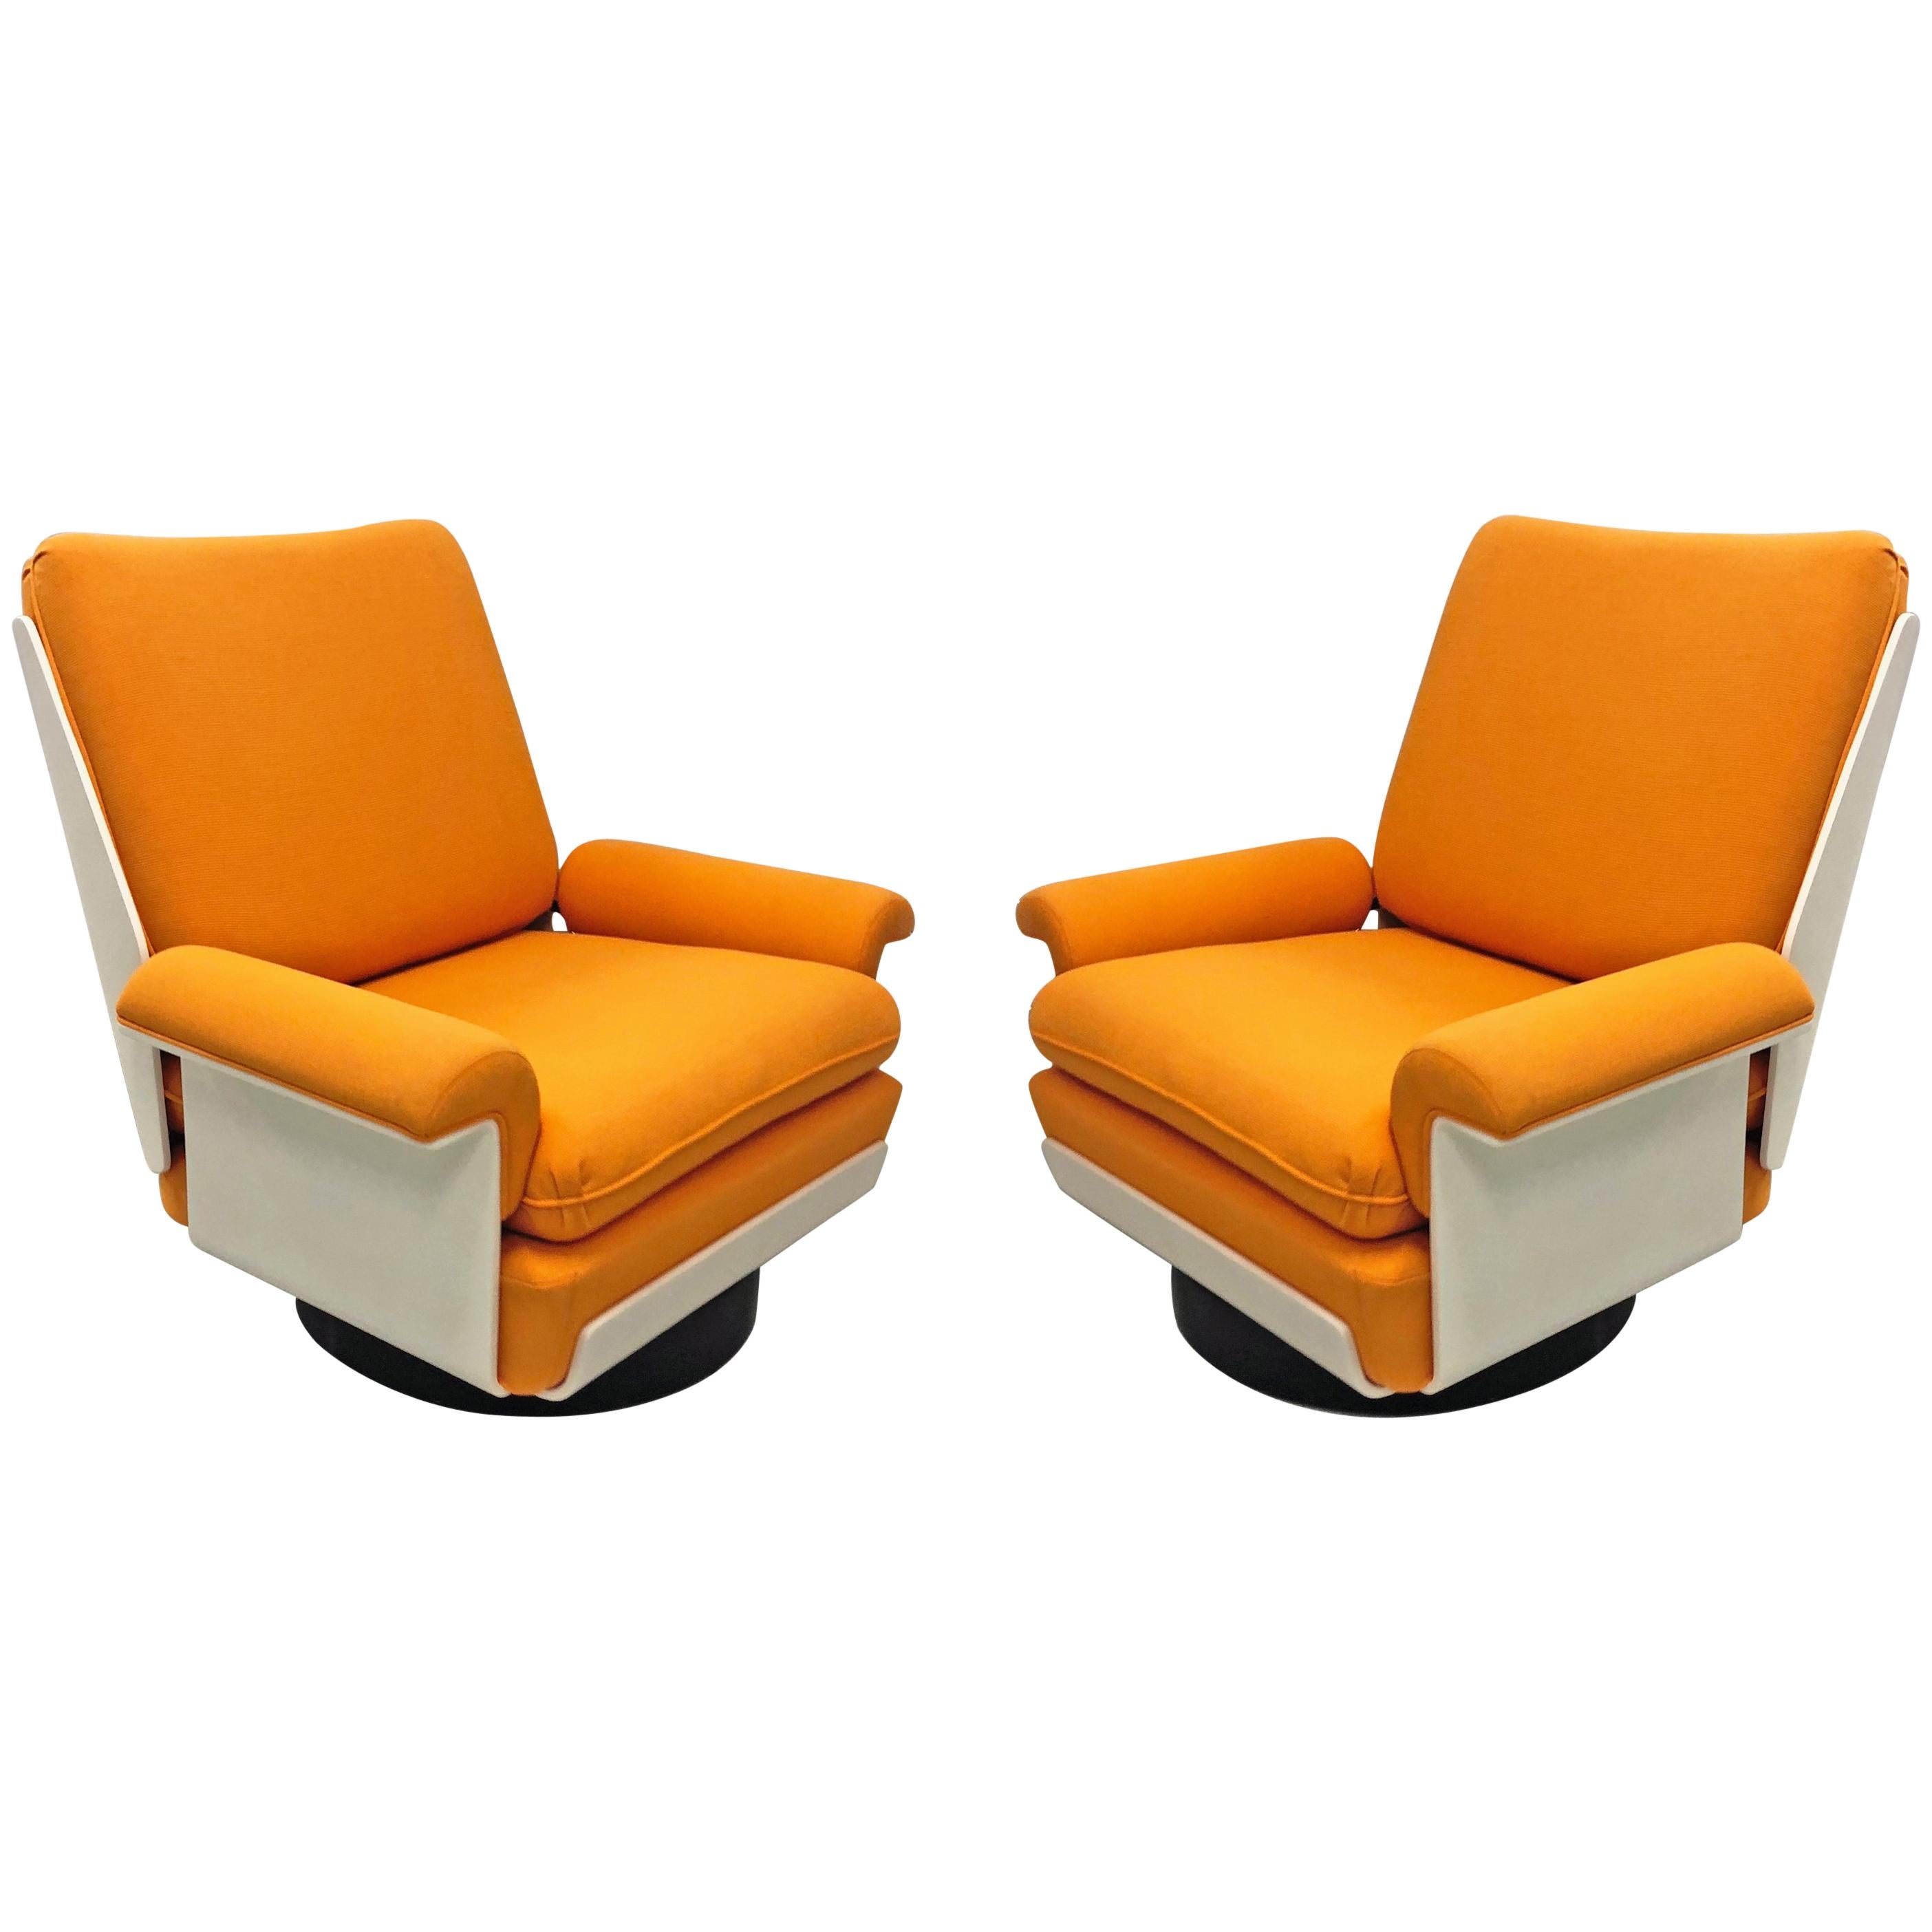 Pair of Swivel Lounge Chairs by Airborne, circa 1965, Made in France